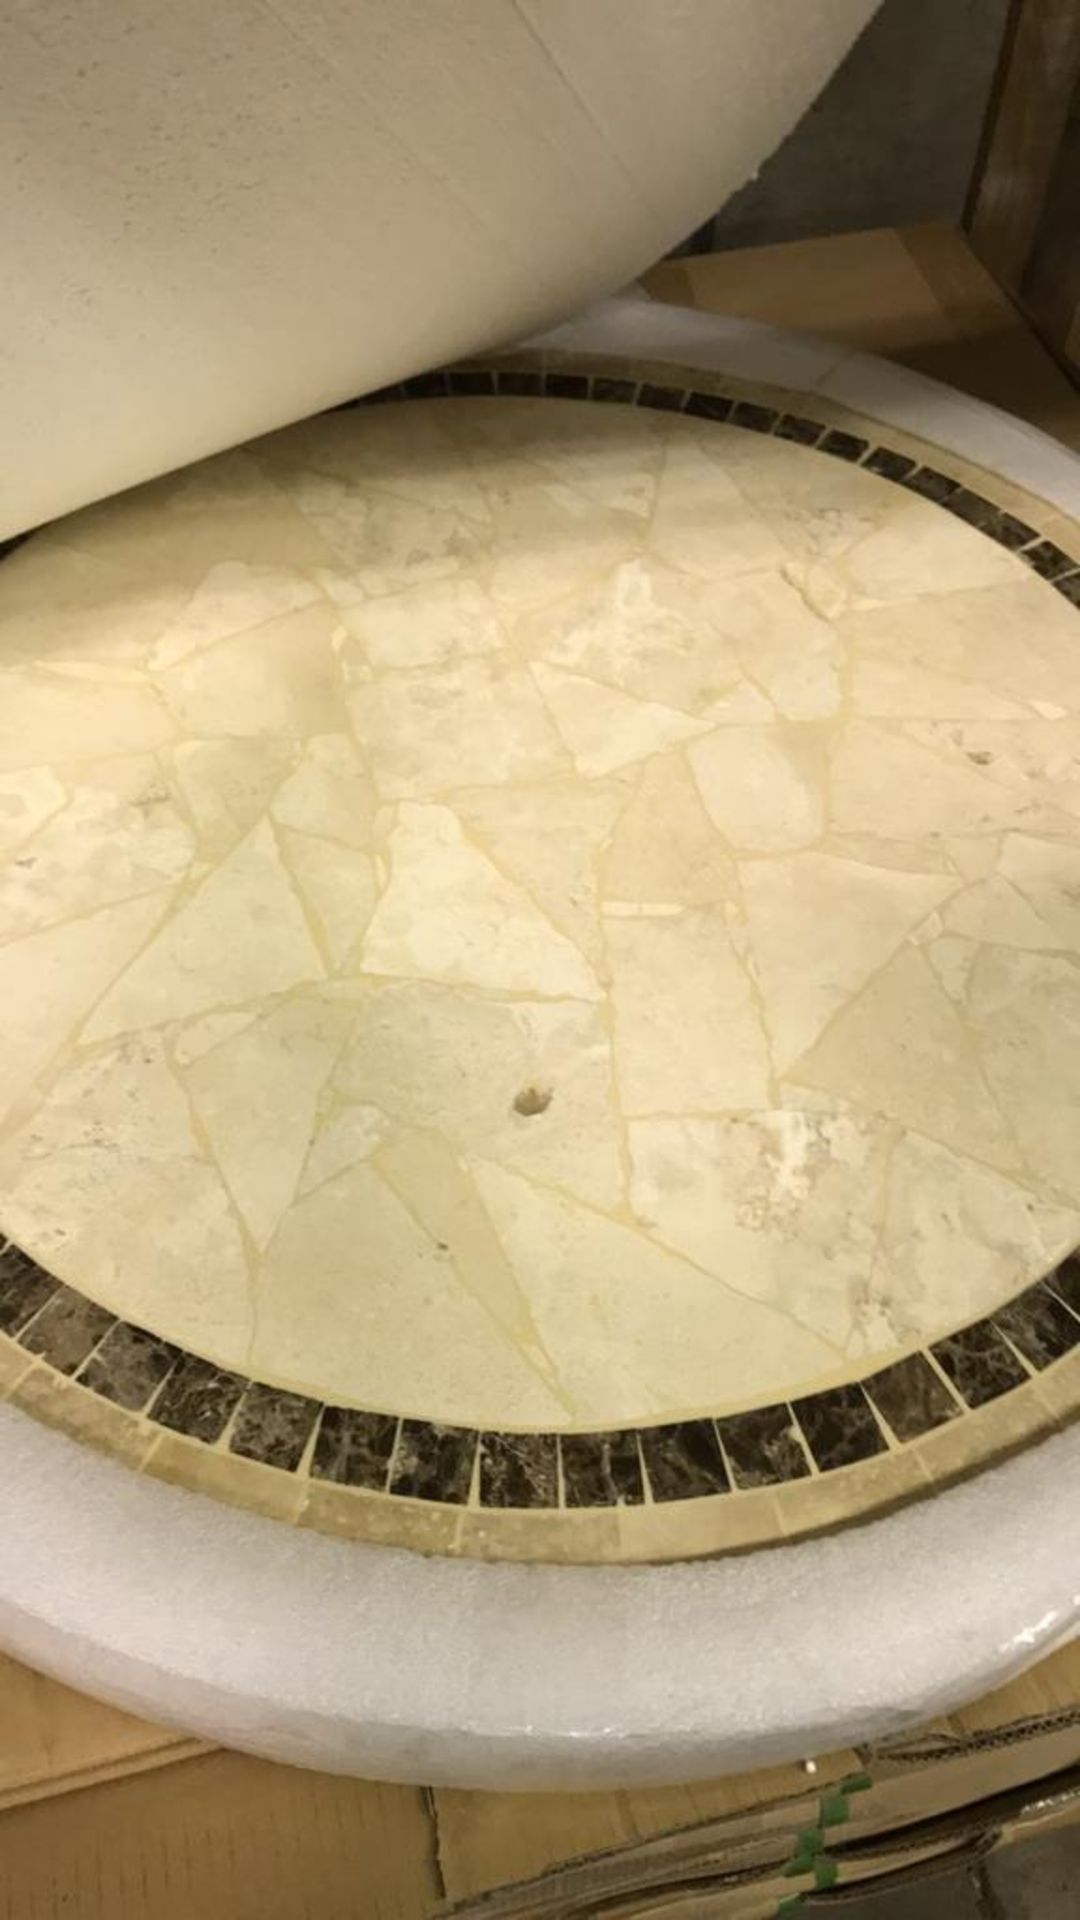 ATCOSTONE 36" Table Top Round Beige - 36 " round, Qty 10 - Image 3 of 3